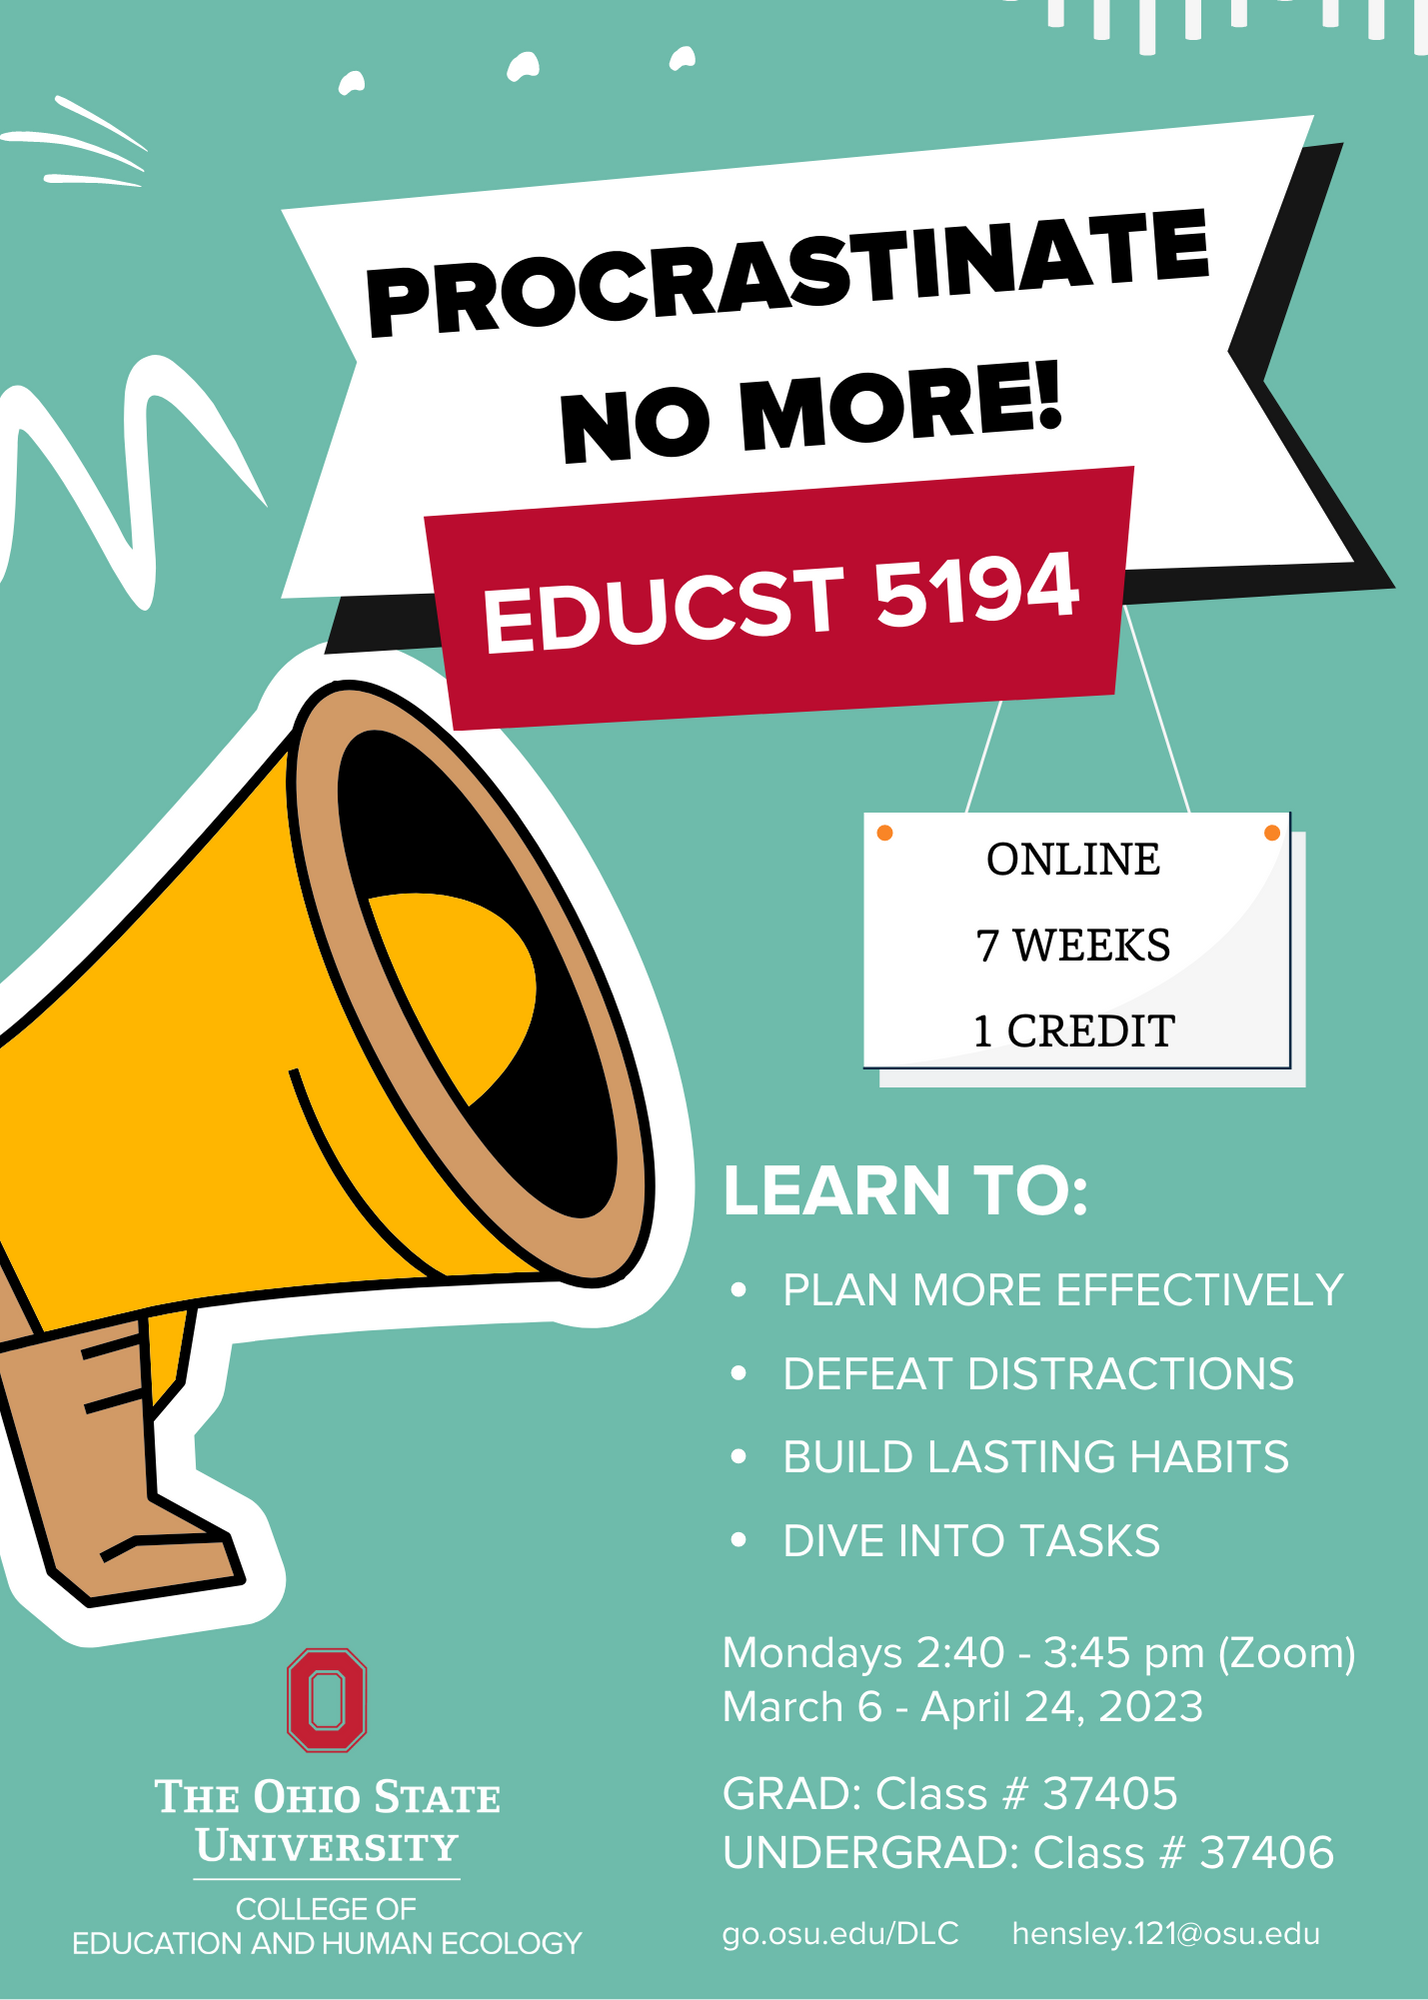 Course flyer with megaphone. Procrastinate no more! EDUCST 5194. Online, 7 weeks, 1 credit. Learn to: plan more effectively, defeat distractions, build lasting habits, dive into tasks. Mondays 2:40-3:45 pm (Zoom). March 6 - April 24, 2023. GRAD: Class # 37405. Undergrad: Class # 37406. The Ohio State University College of Education and Human Ecology. go.osu.edu/DLC hensley.121@osu.edu